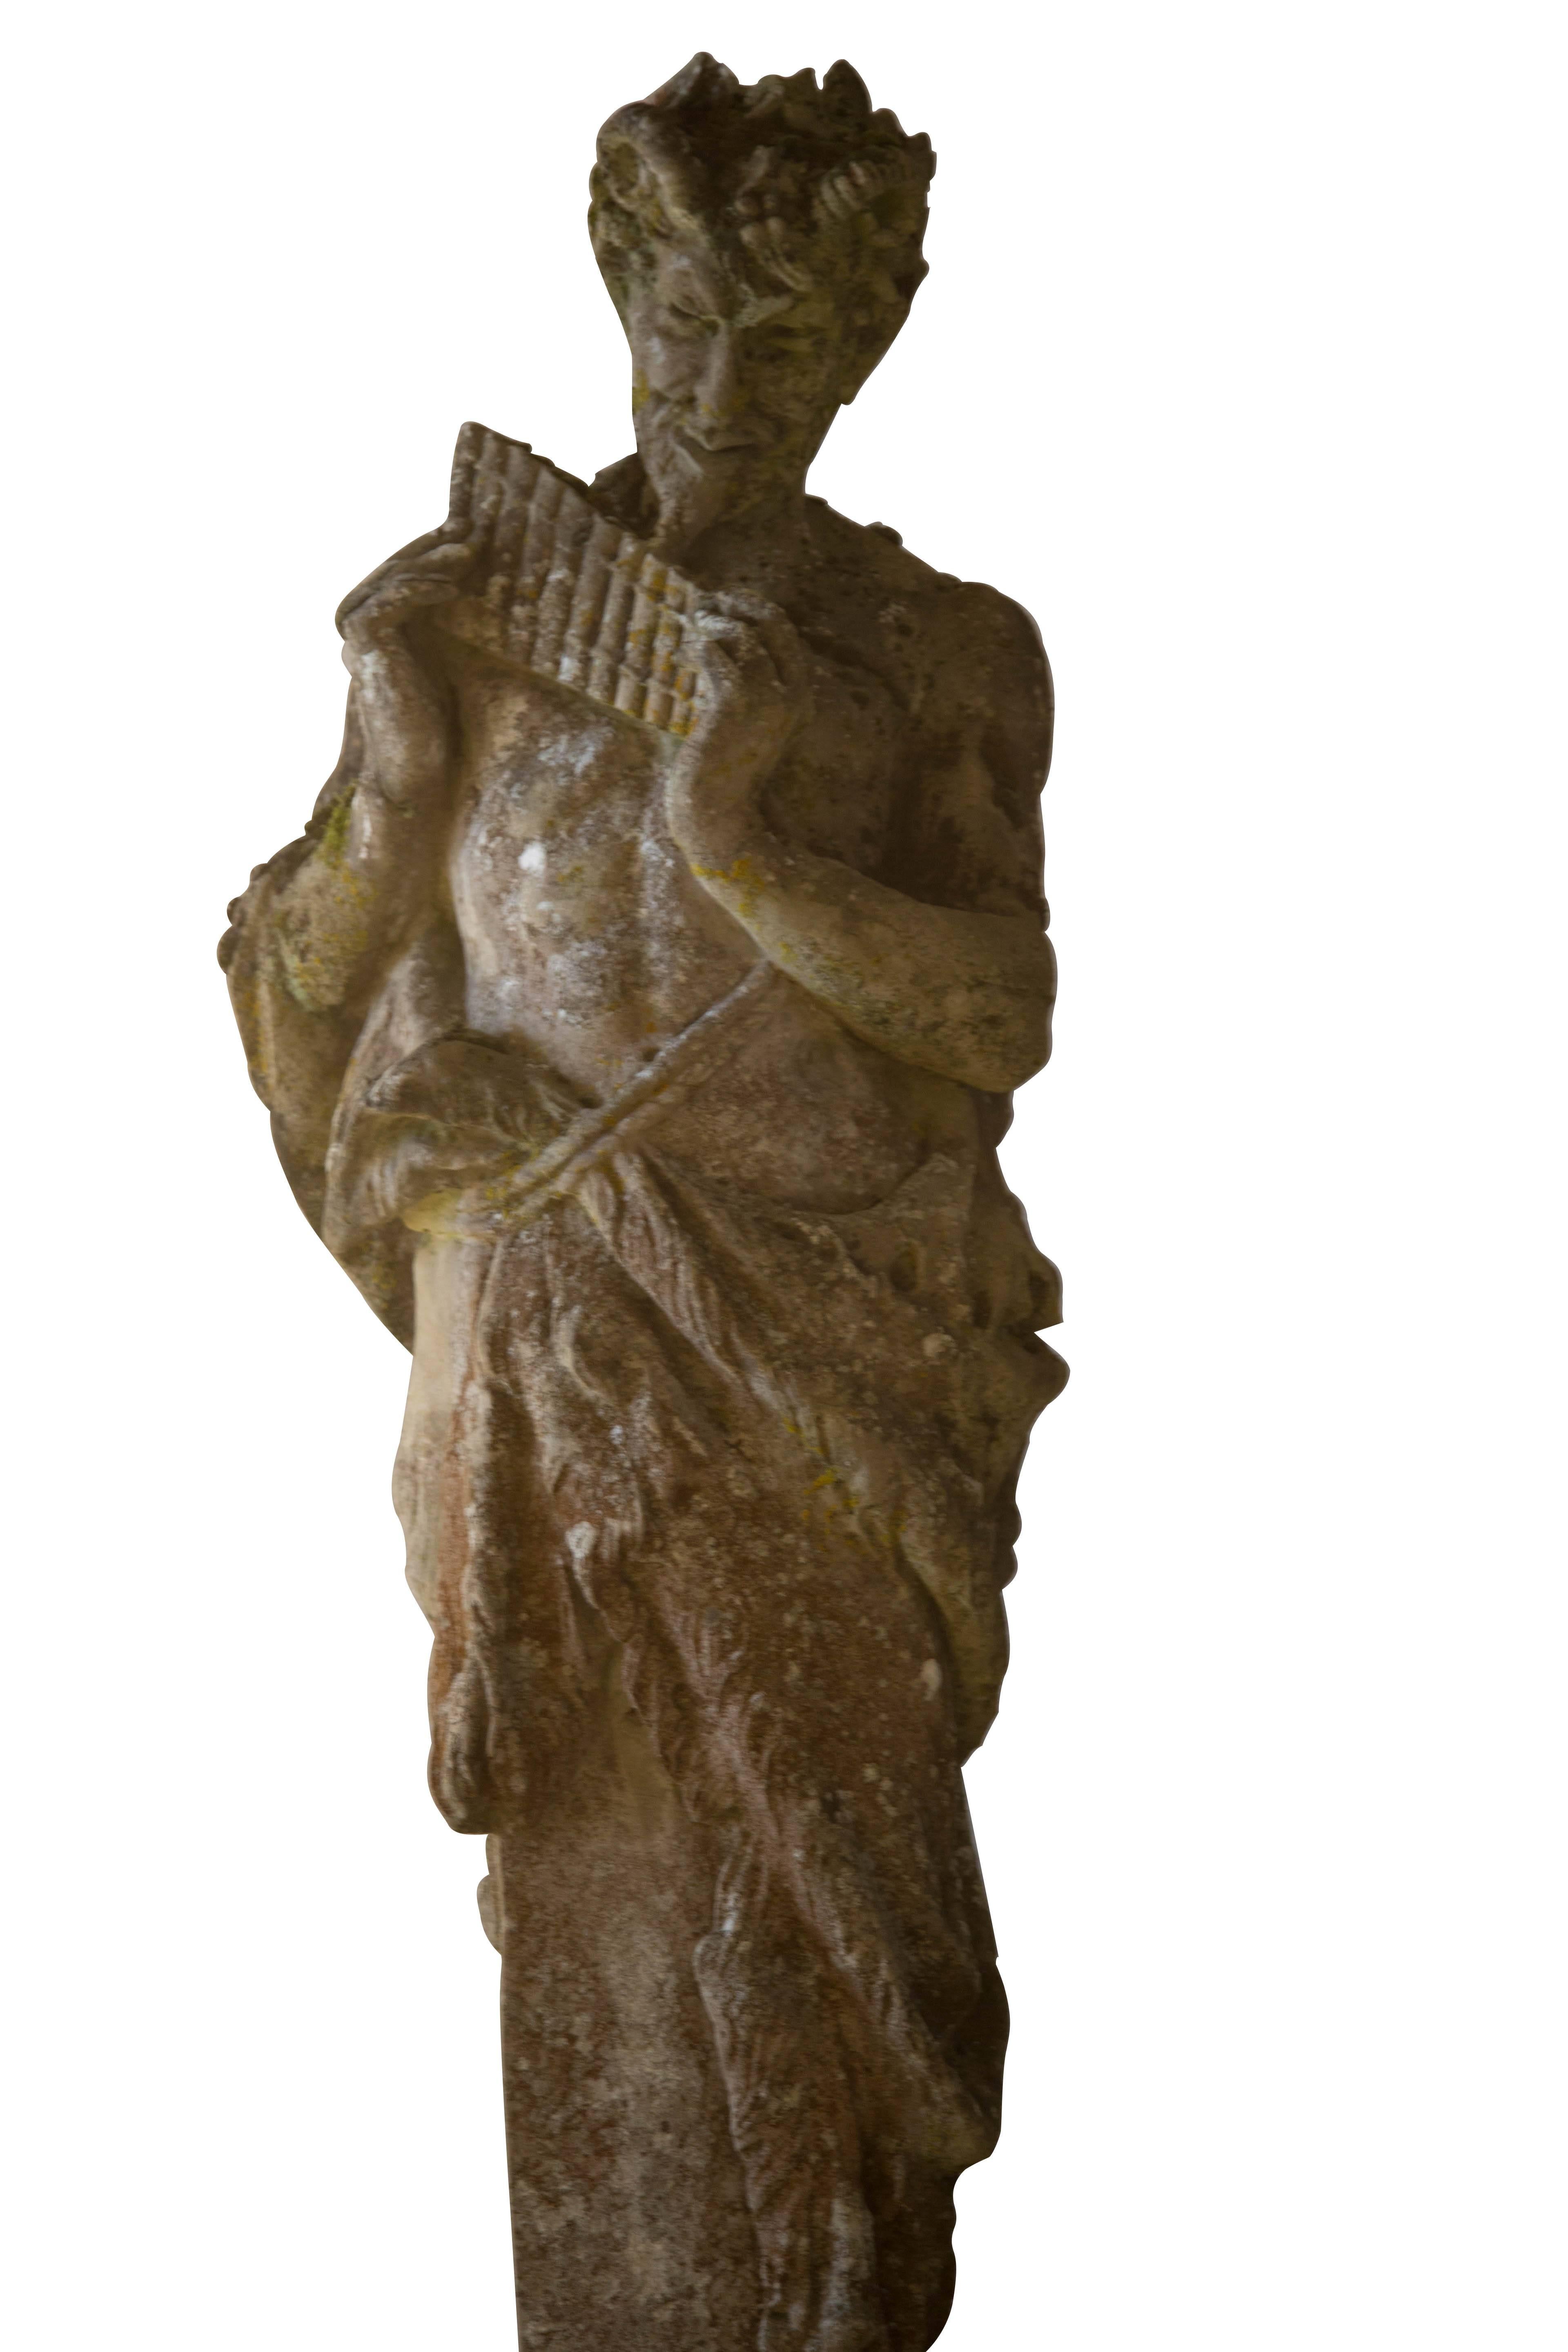 20th Century Composition Stone Figure of Pan